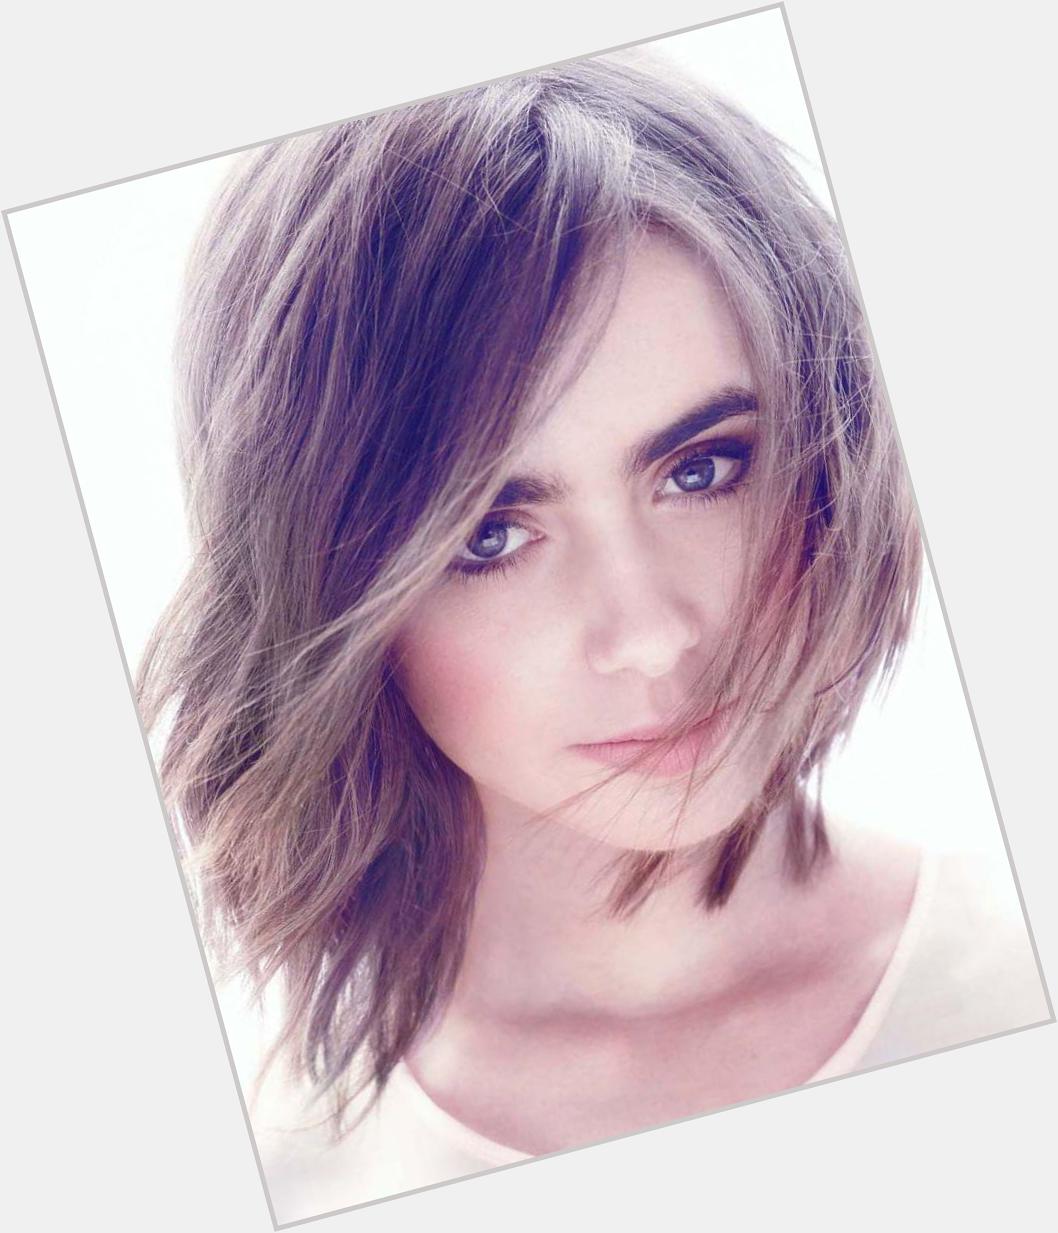 Happy birthday to lily collins!    